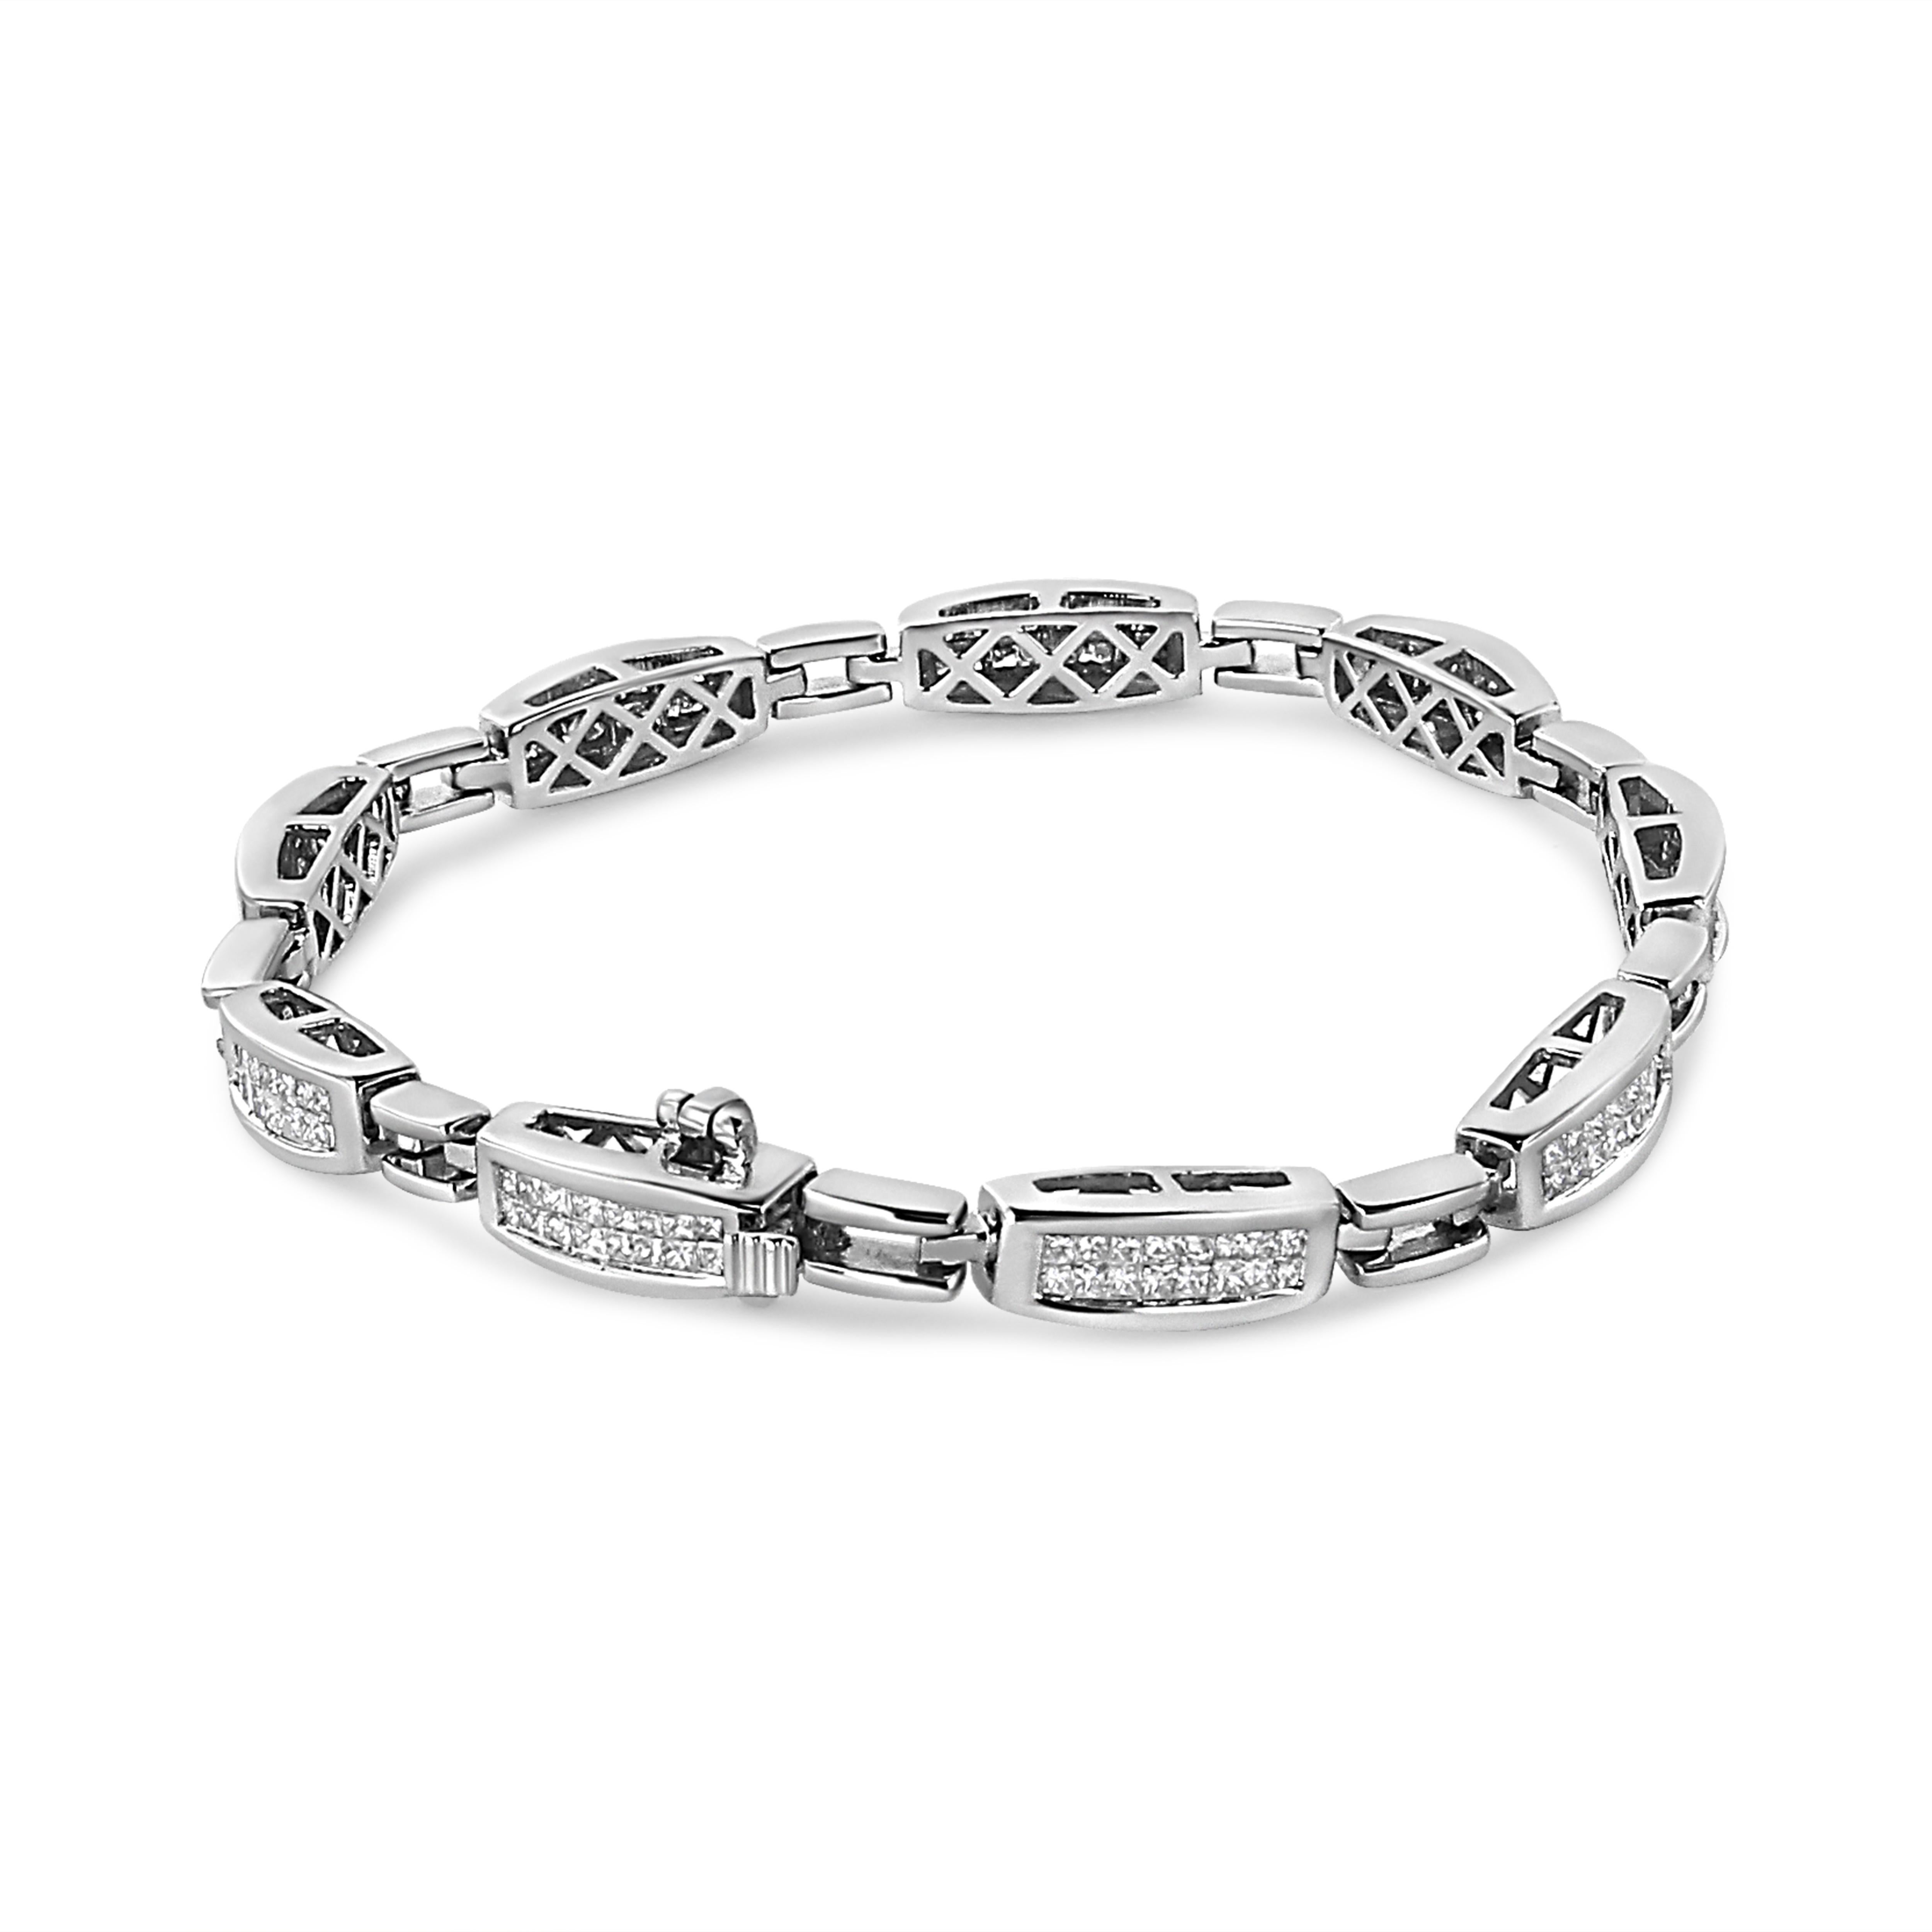 Shower her with diamonds and the timeless sparkle of this diamond link bracelet. The beauty of this bracelet is structured to deliver awe-inspiring contemporary elegance with spectacular contours that wrap the band of the bracelet in panoramic